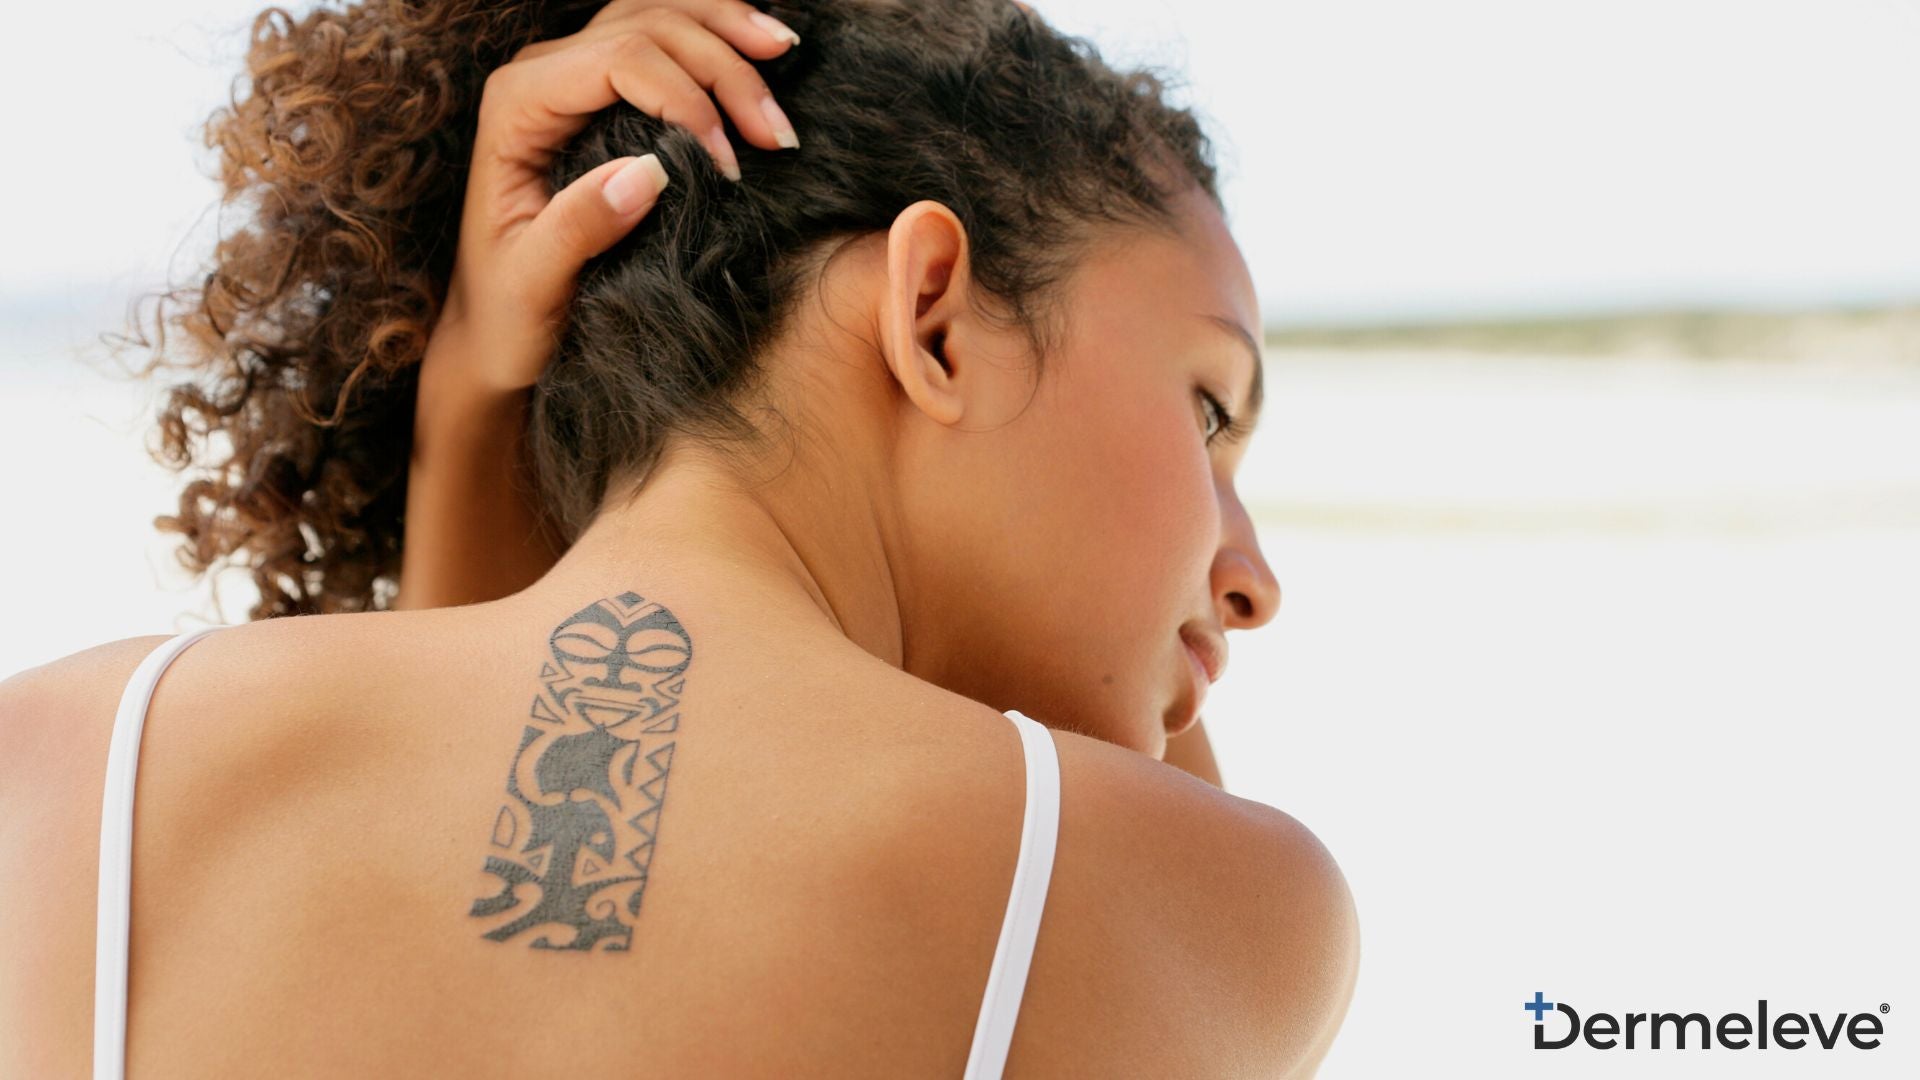 Breaking The Stigma Scar Camouflage Tattoos Are Changing Perceptions